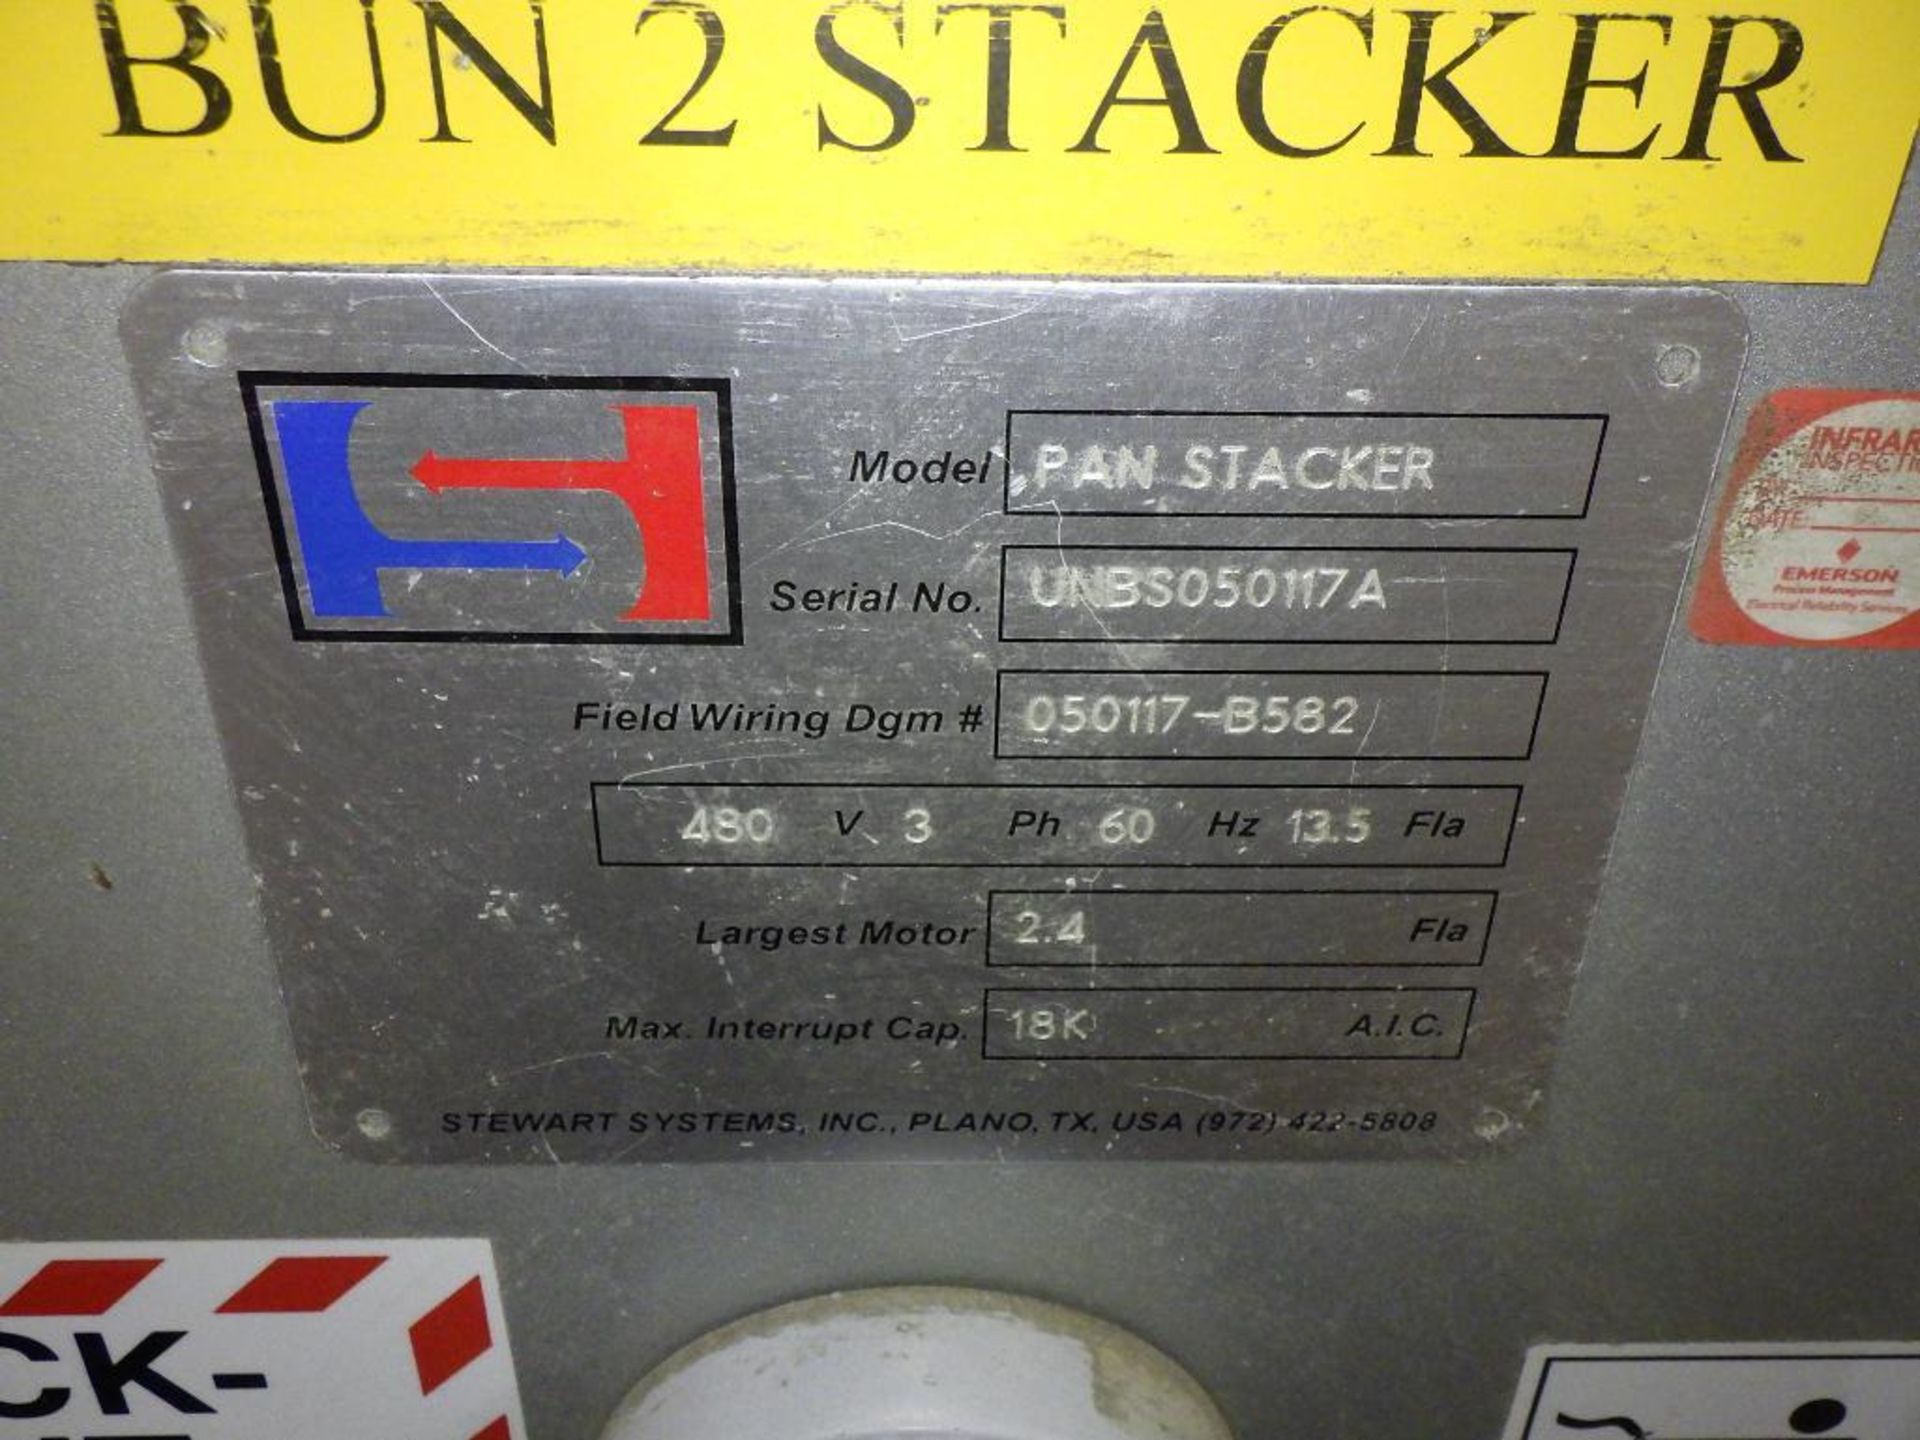 2005 Stewart Systems pan stacker - Image 22 of 22